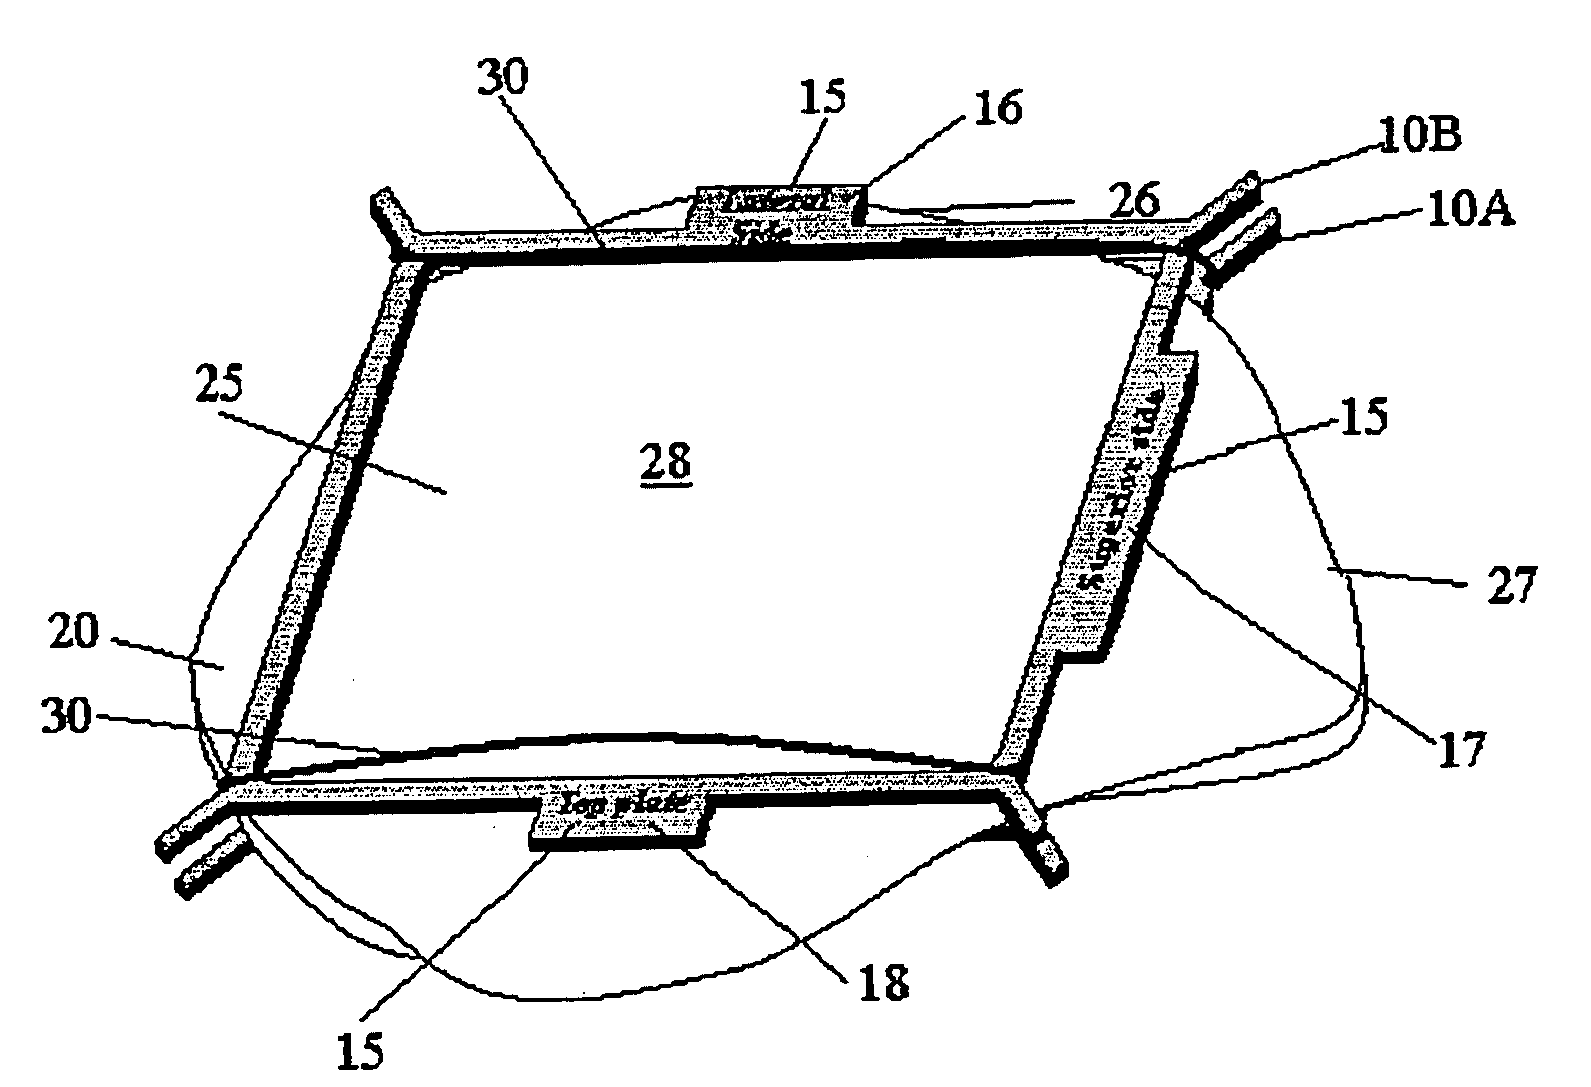 Device and Method for Transporting and Handling Tissue